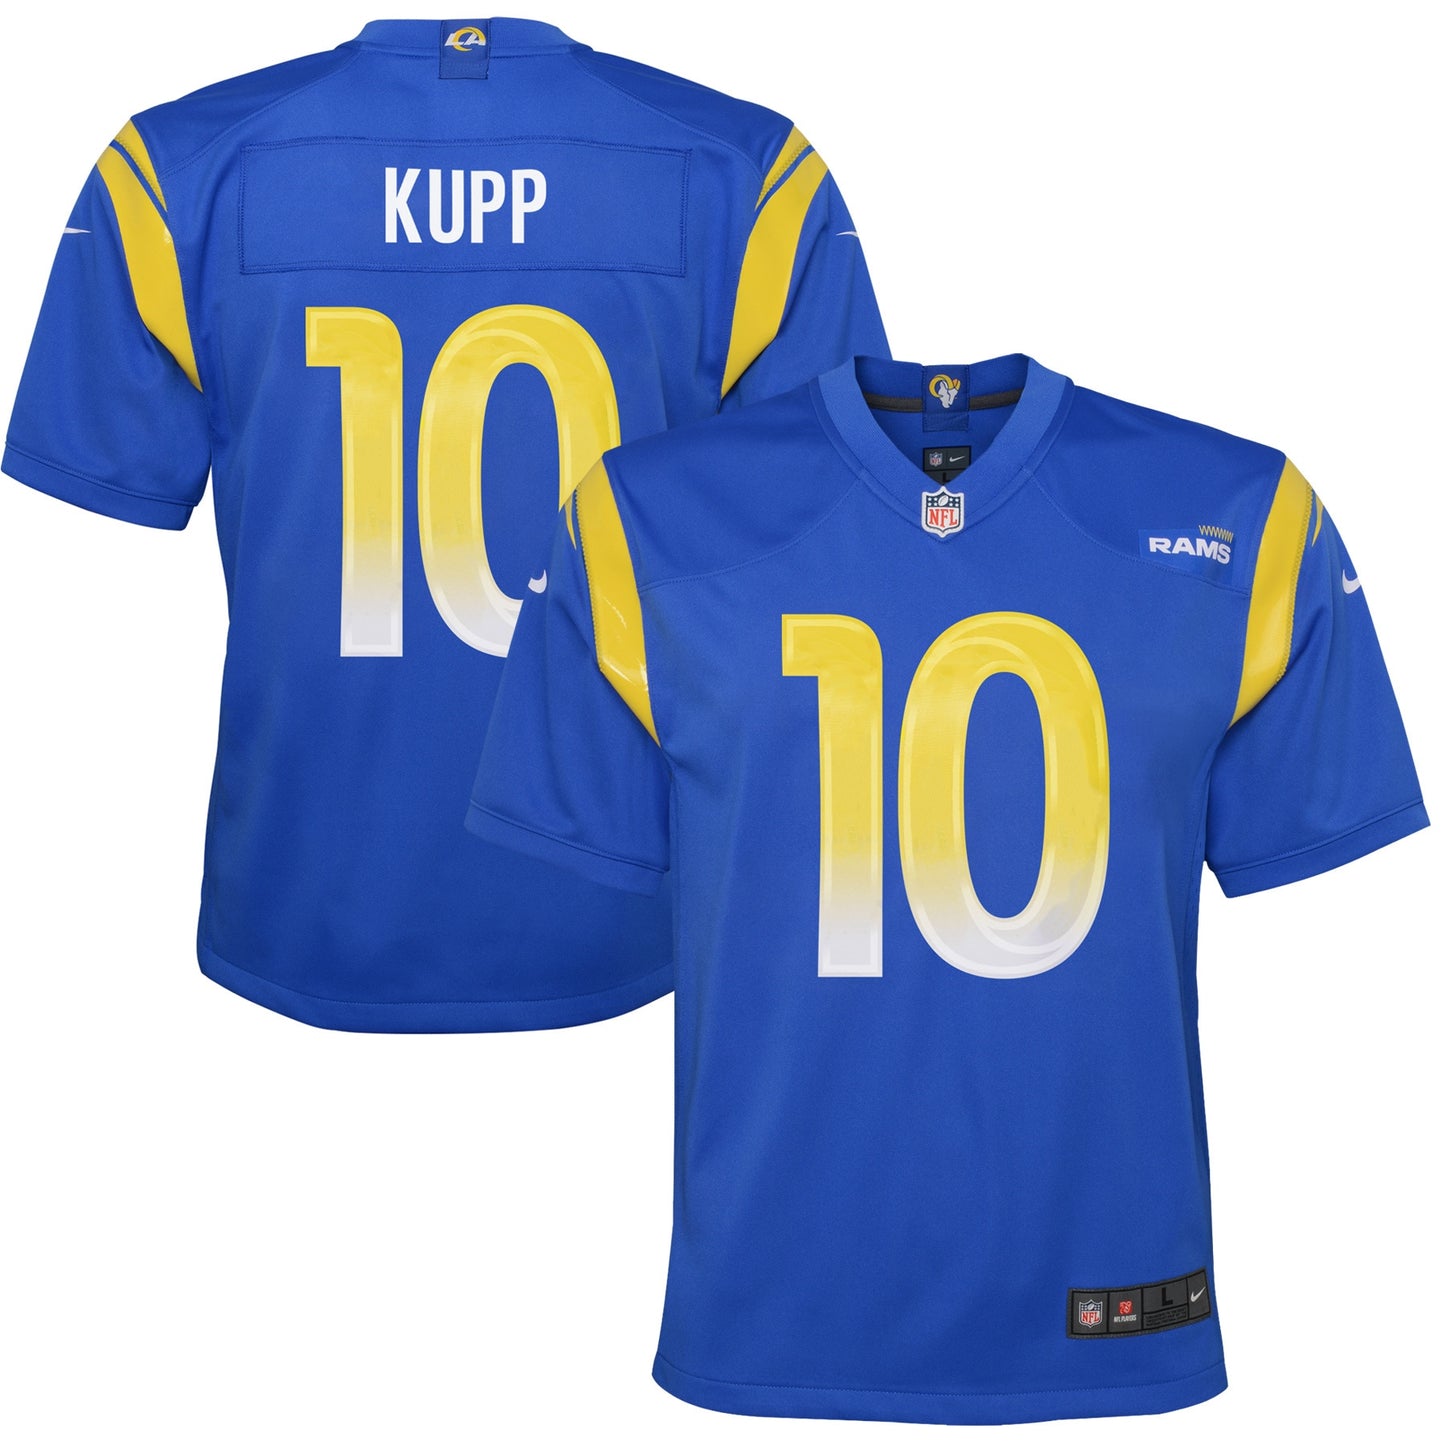 Cooper Kupp Los Angeles Rams Nike Youth Game Jersey - Royal